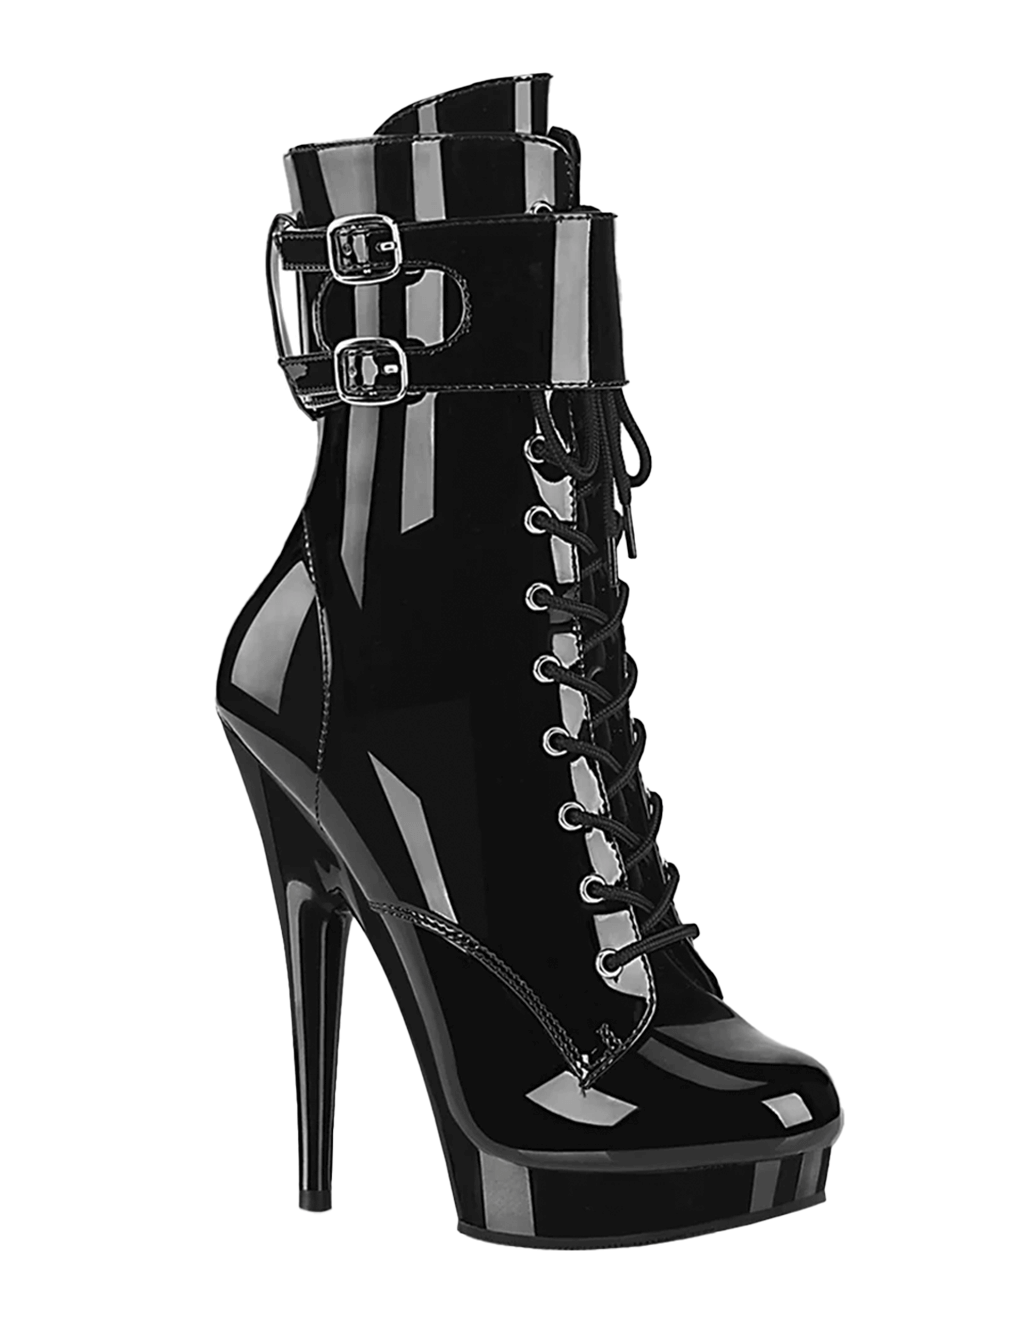 Sultry-1023 Lace Up Ankle Boot Heel With Cuffs - Black Patent/Black - Main